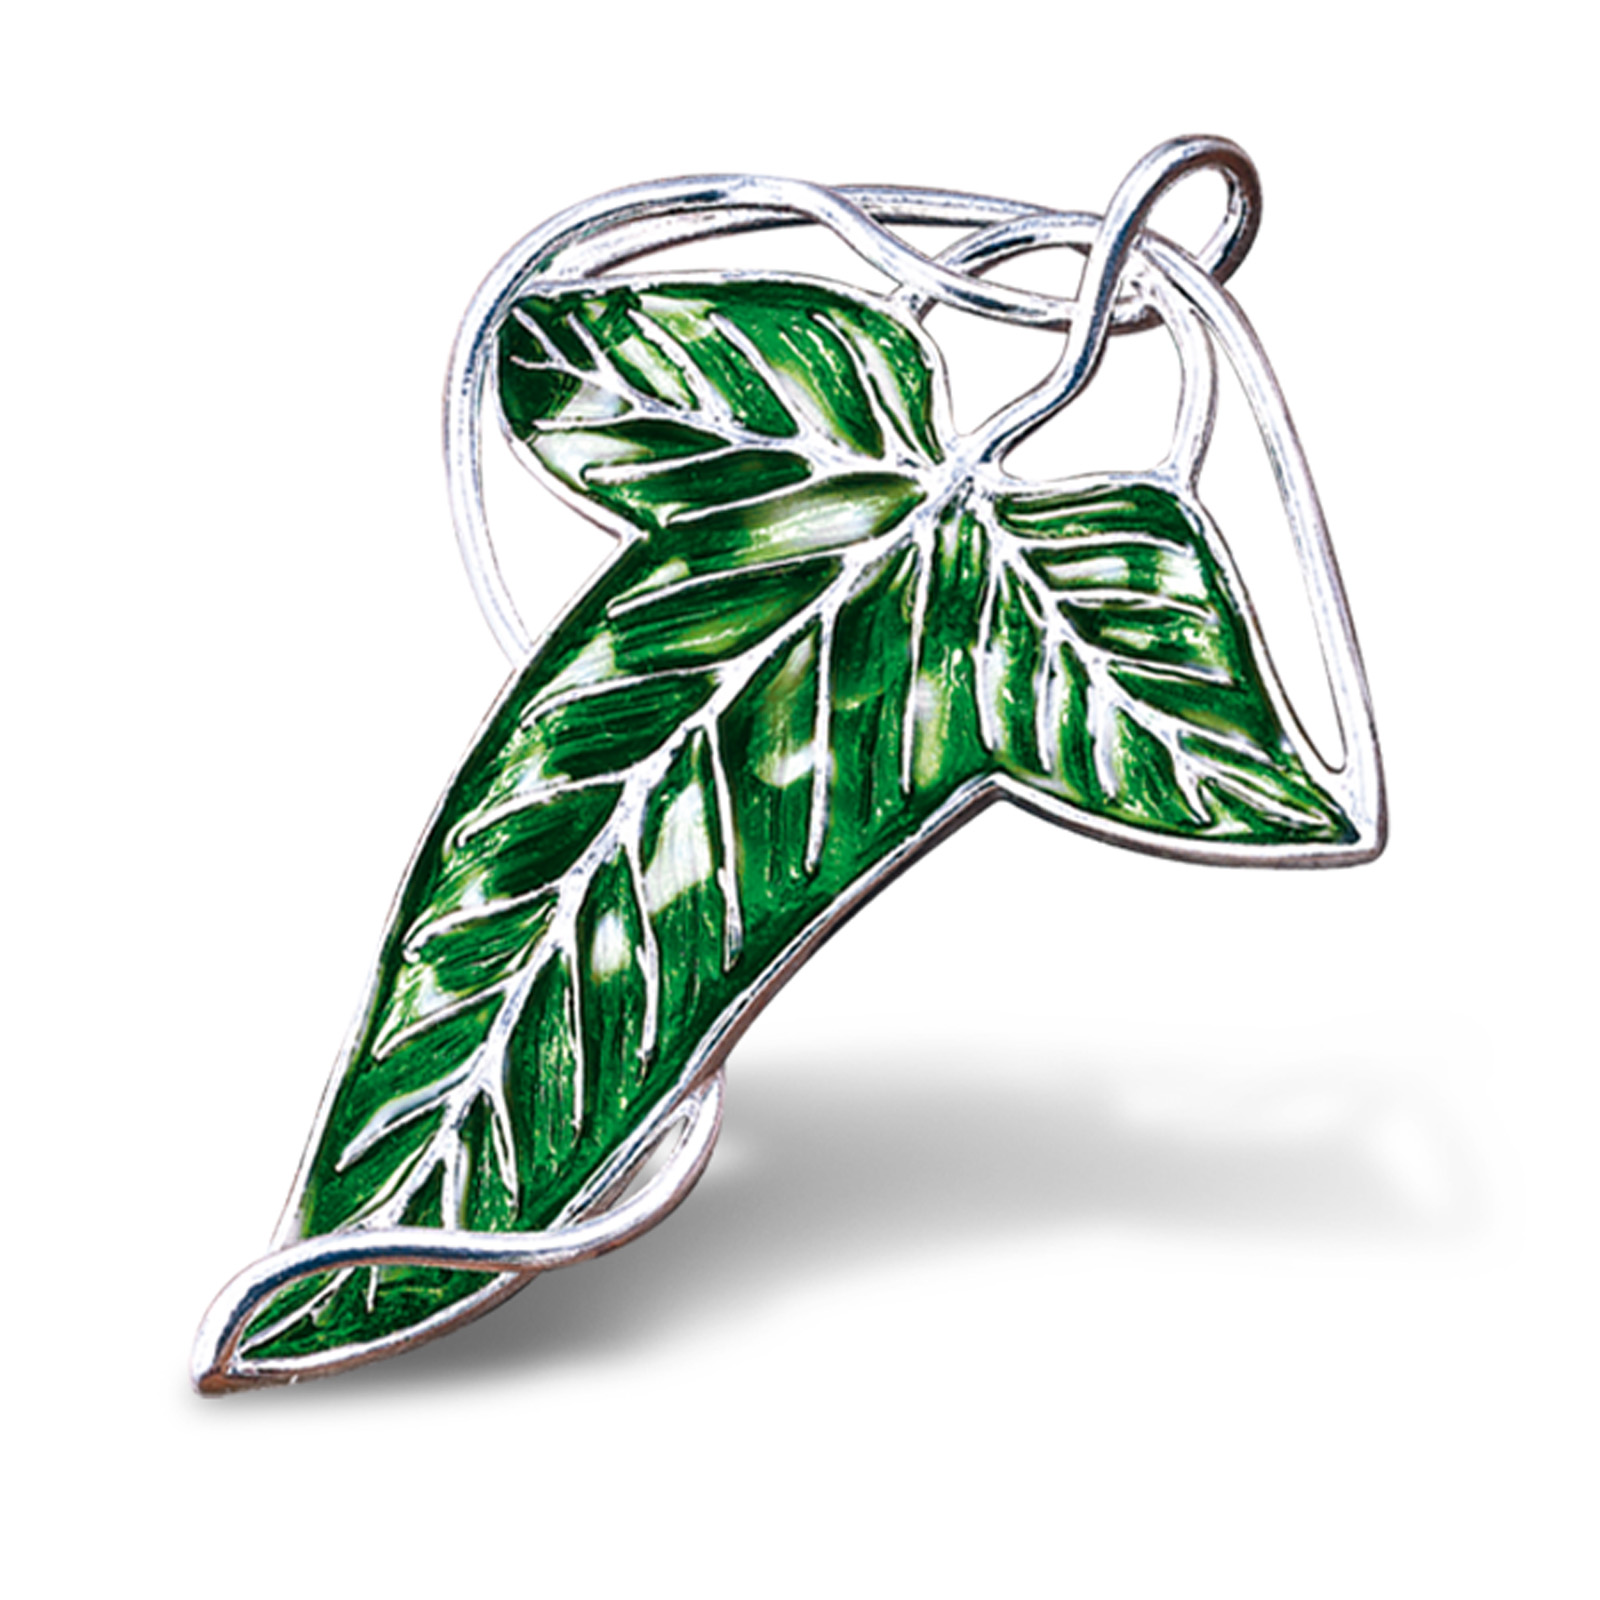 Lord of the Rings - Leaf Brooch